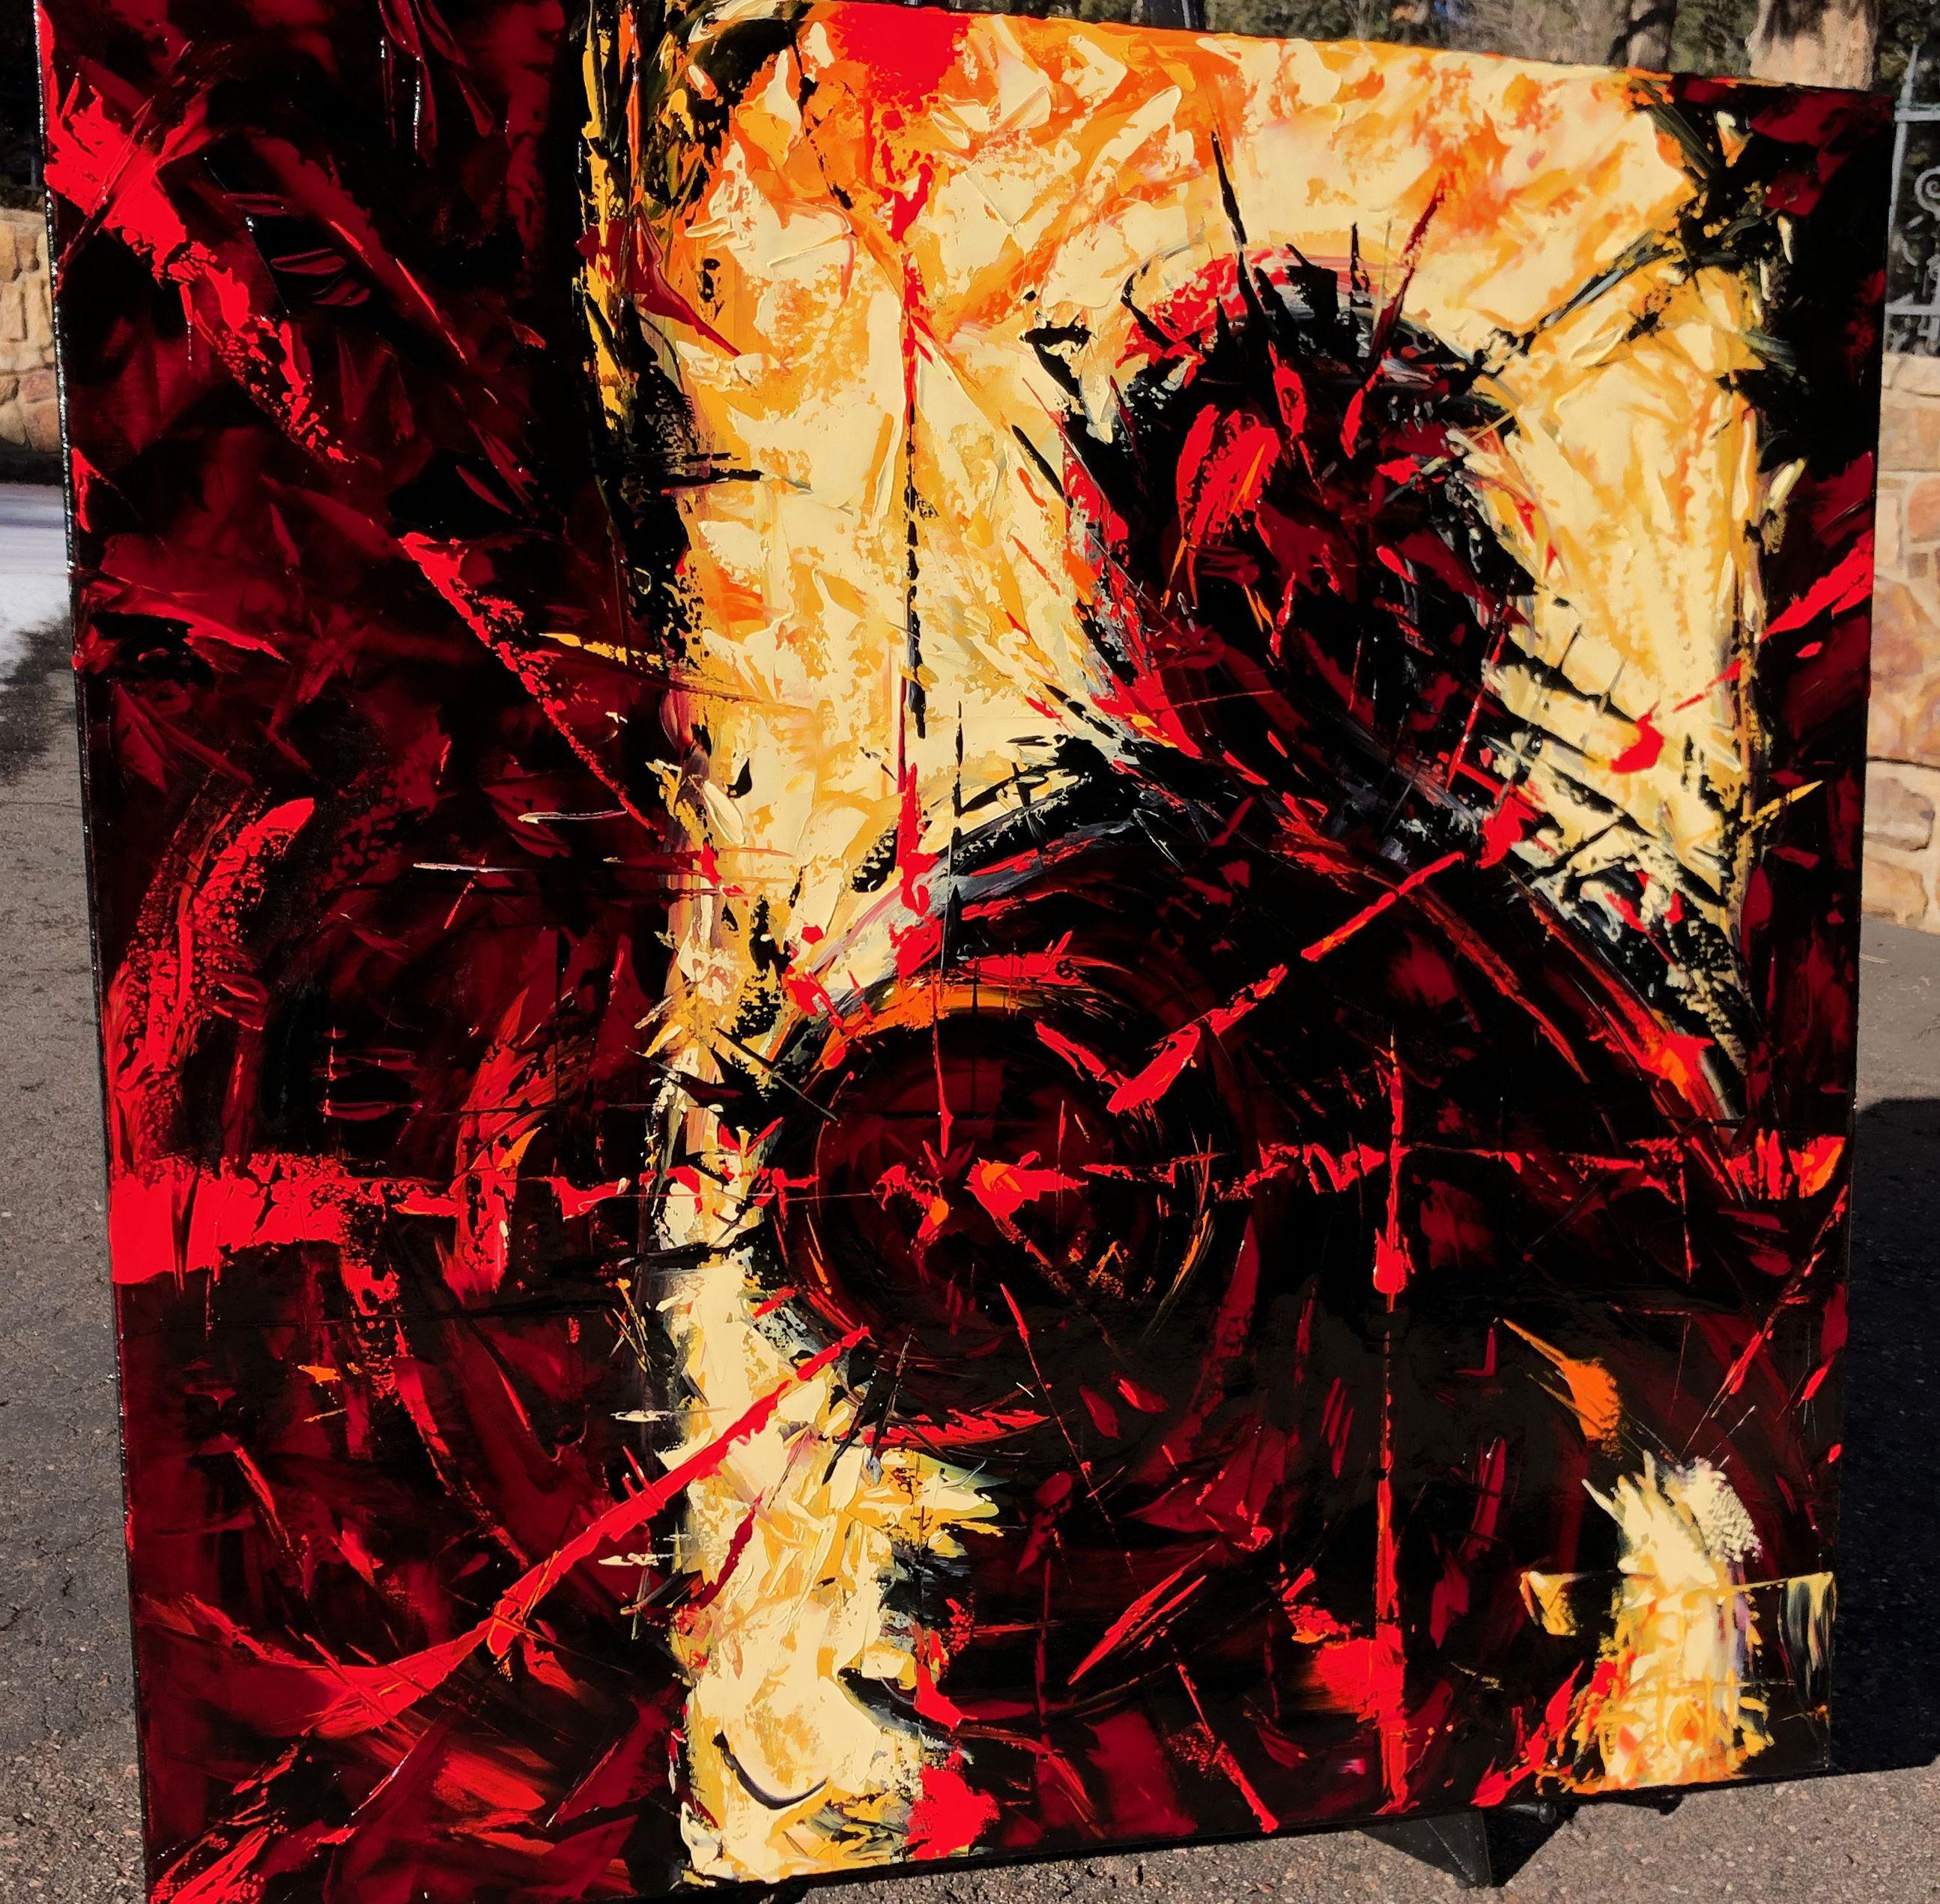 He kicks open the door and blasts a hole in my chest. :: Painting :: Abstract Expressionism :: This piece comes with an official certificate of authenticity signed by the artist :: Ready to Hang: Yes :: Signed: Yes :: Signature Location: bottom